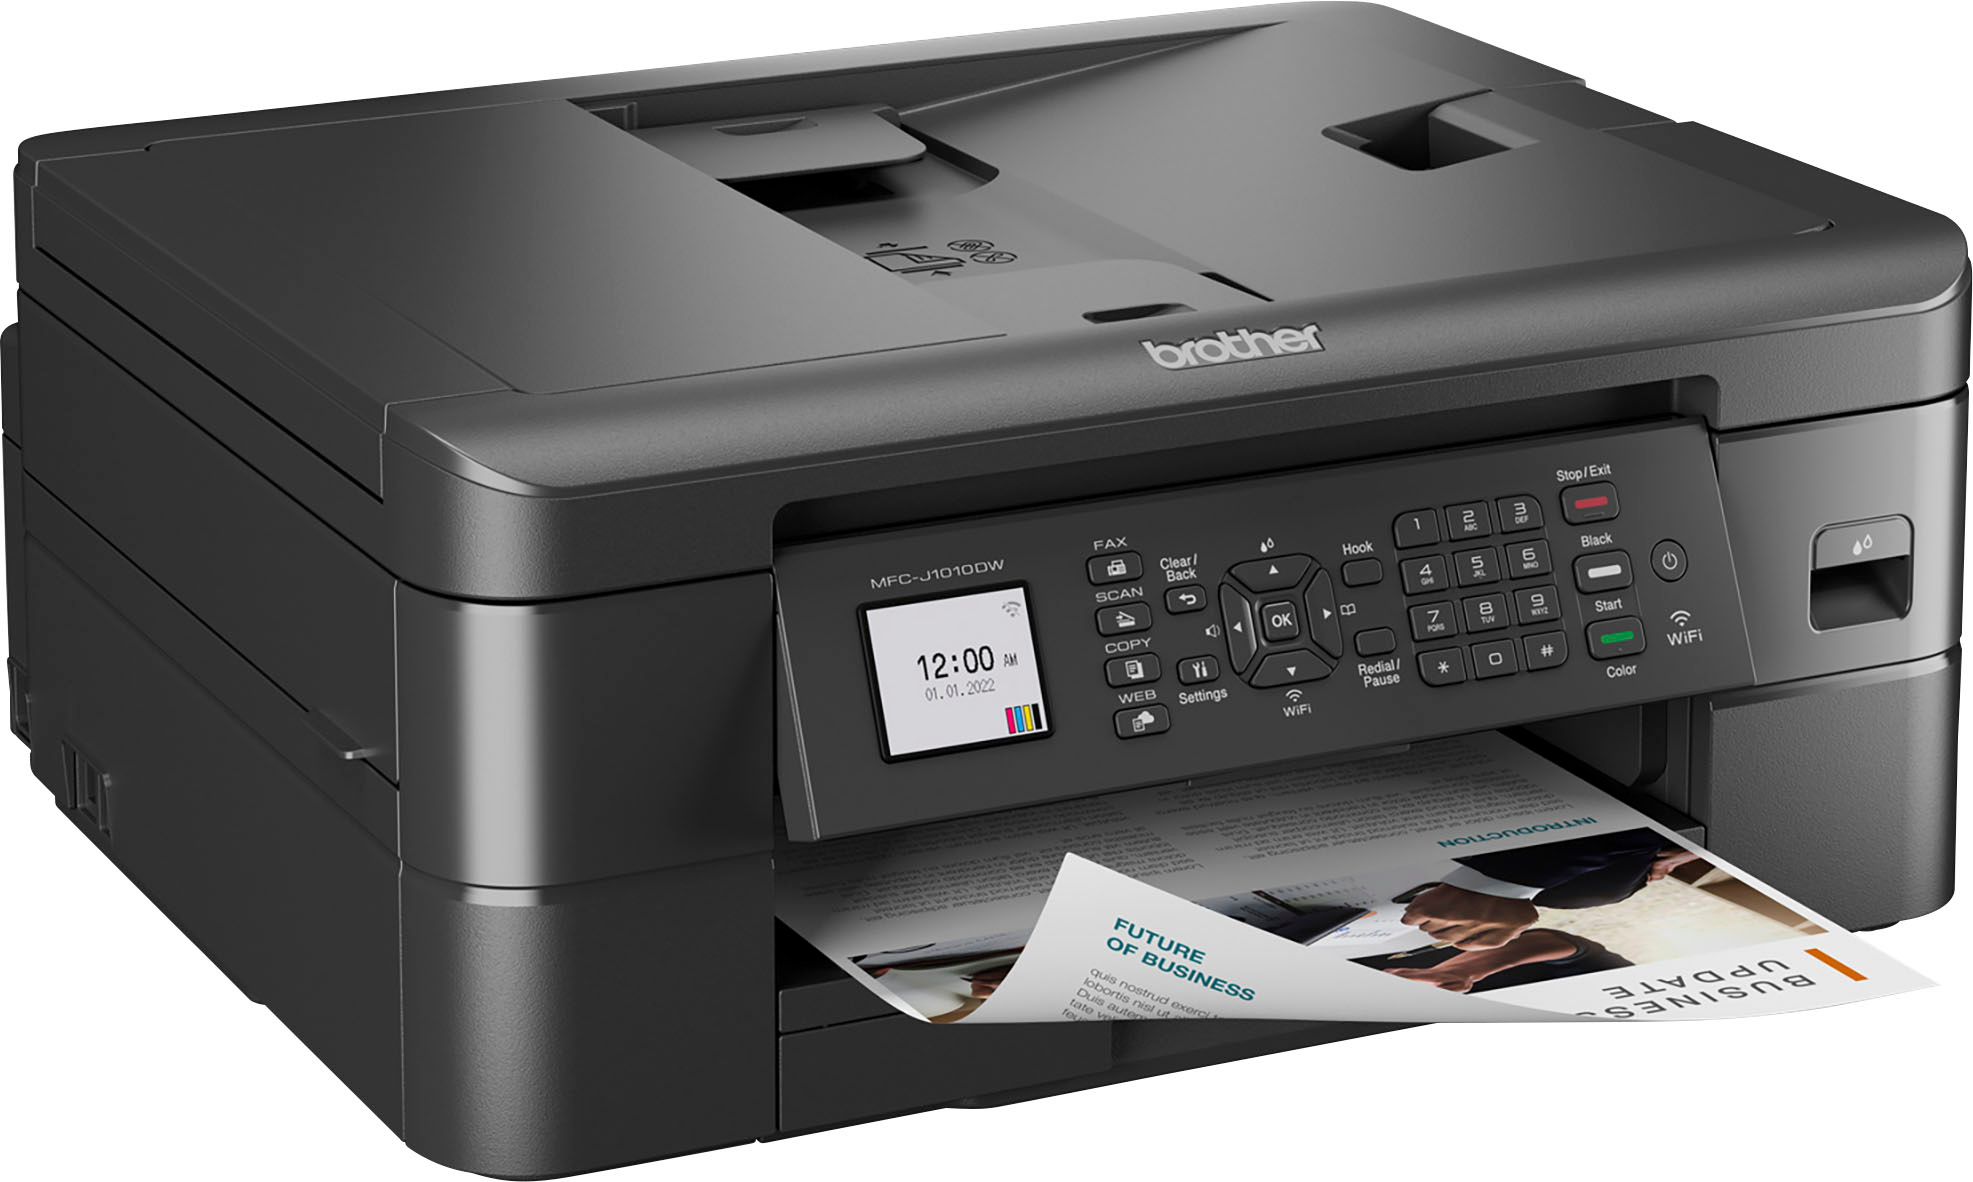 Brother MFC-J1010dw Reset Printer To Factory Defaults. 